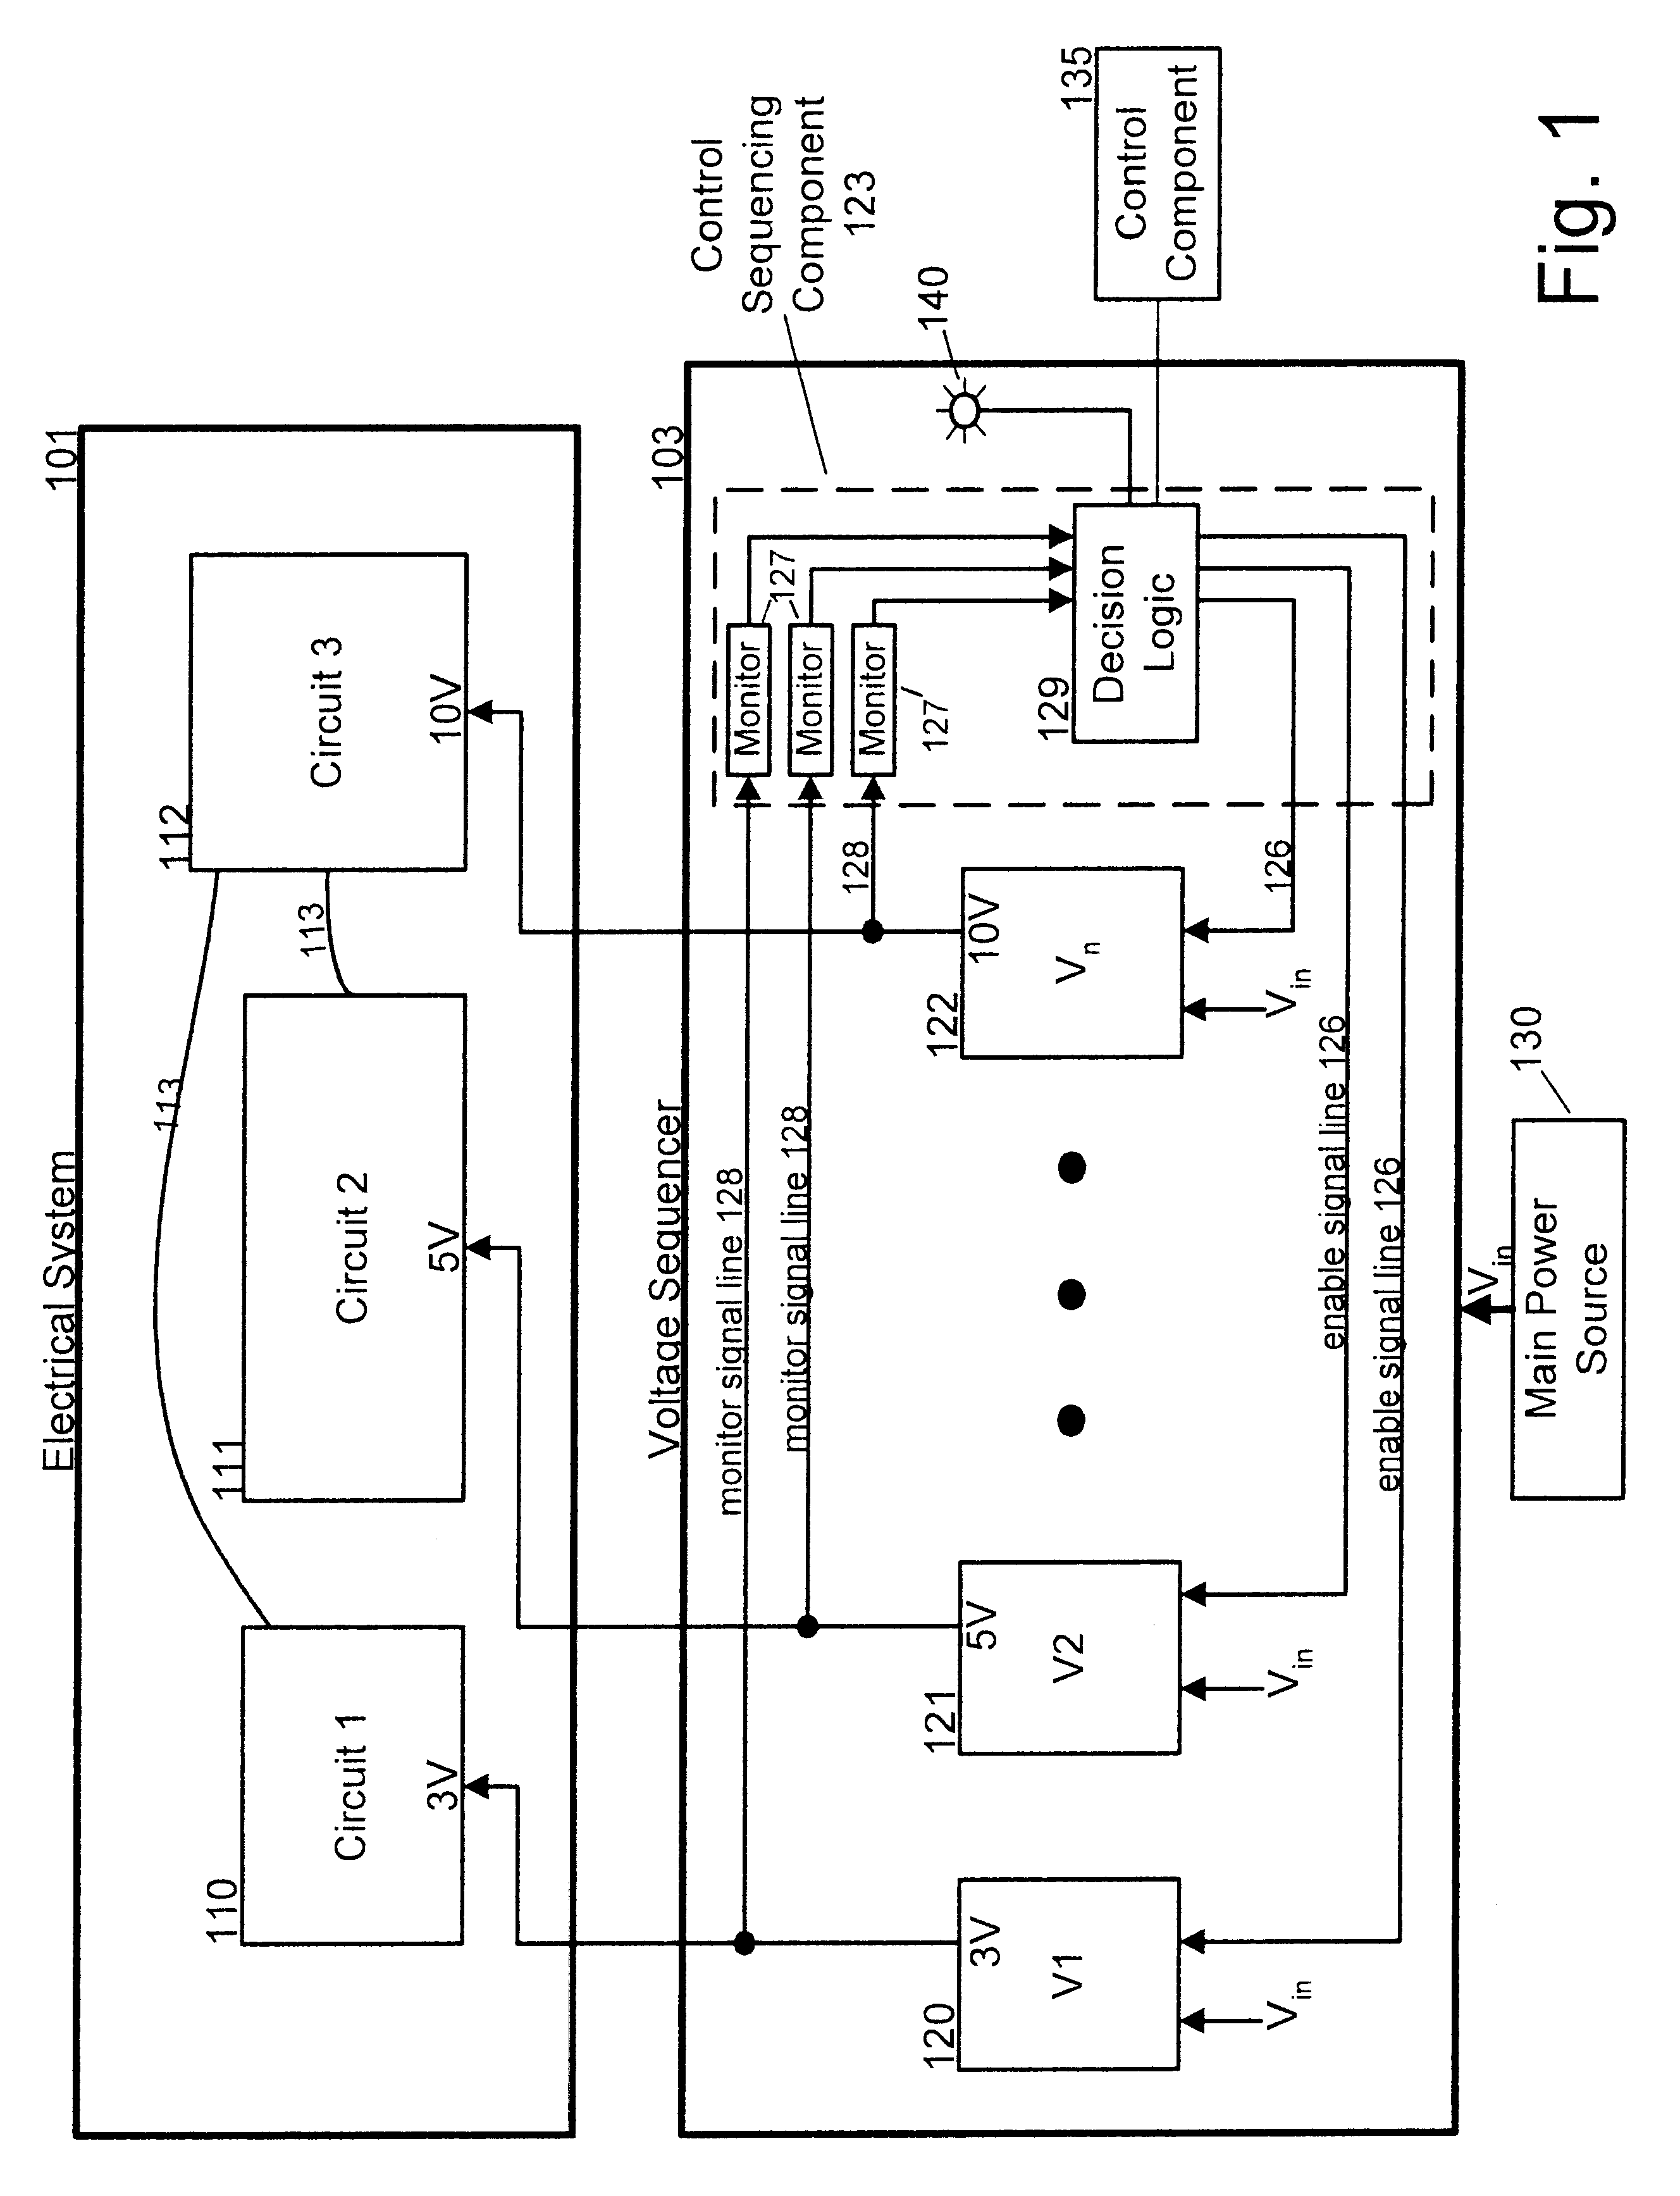 Voltage sequencing circuit for powering-up sensitive electrical components